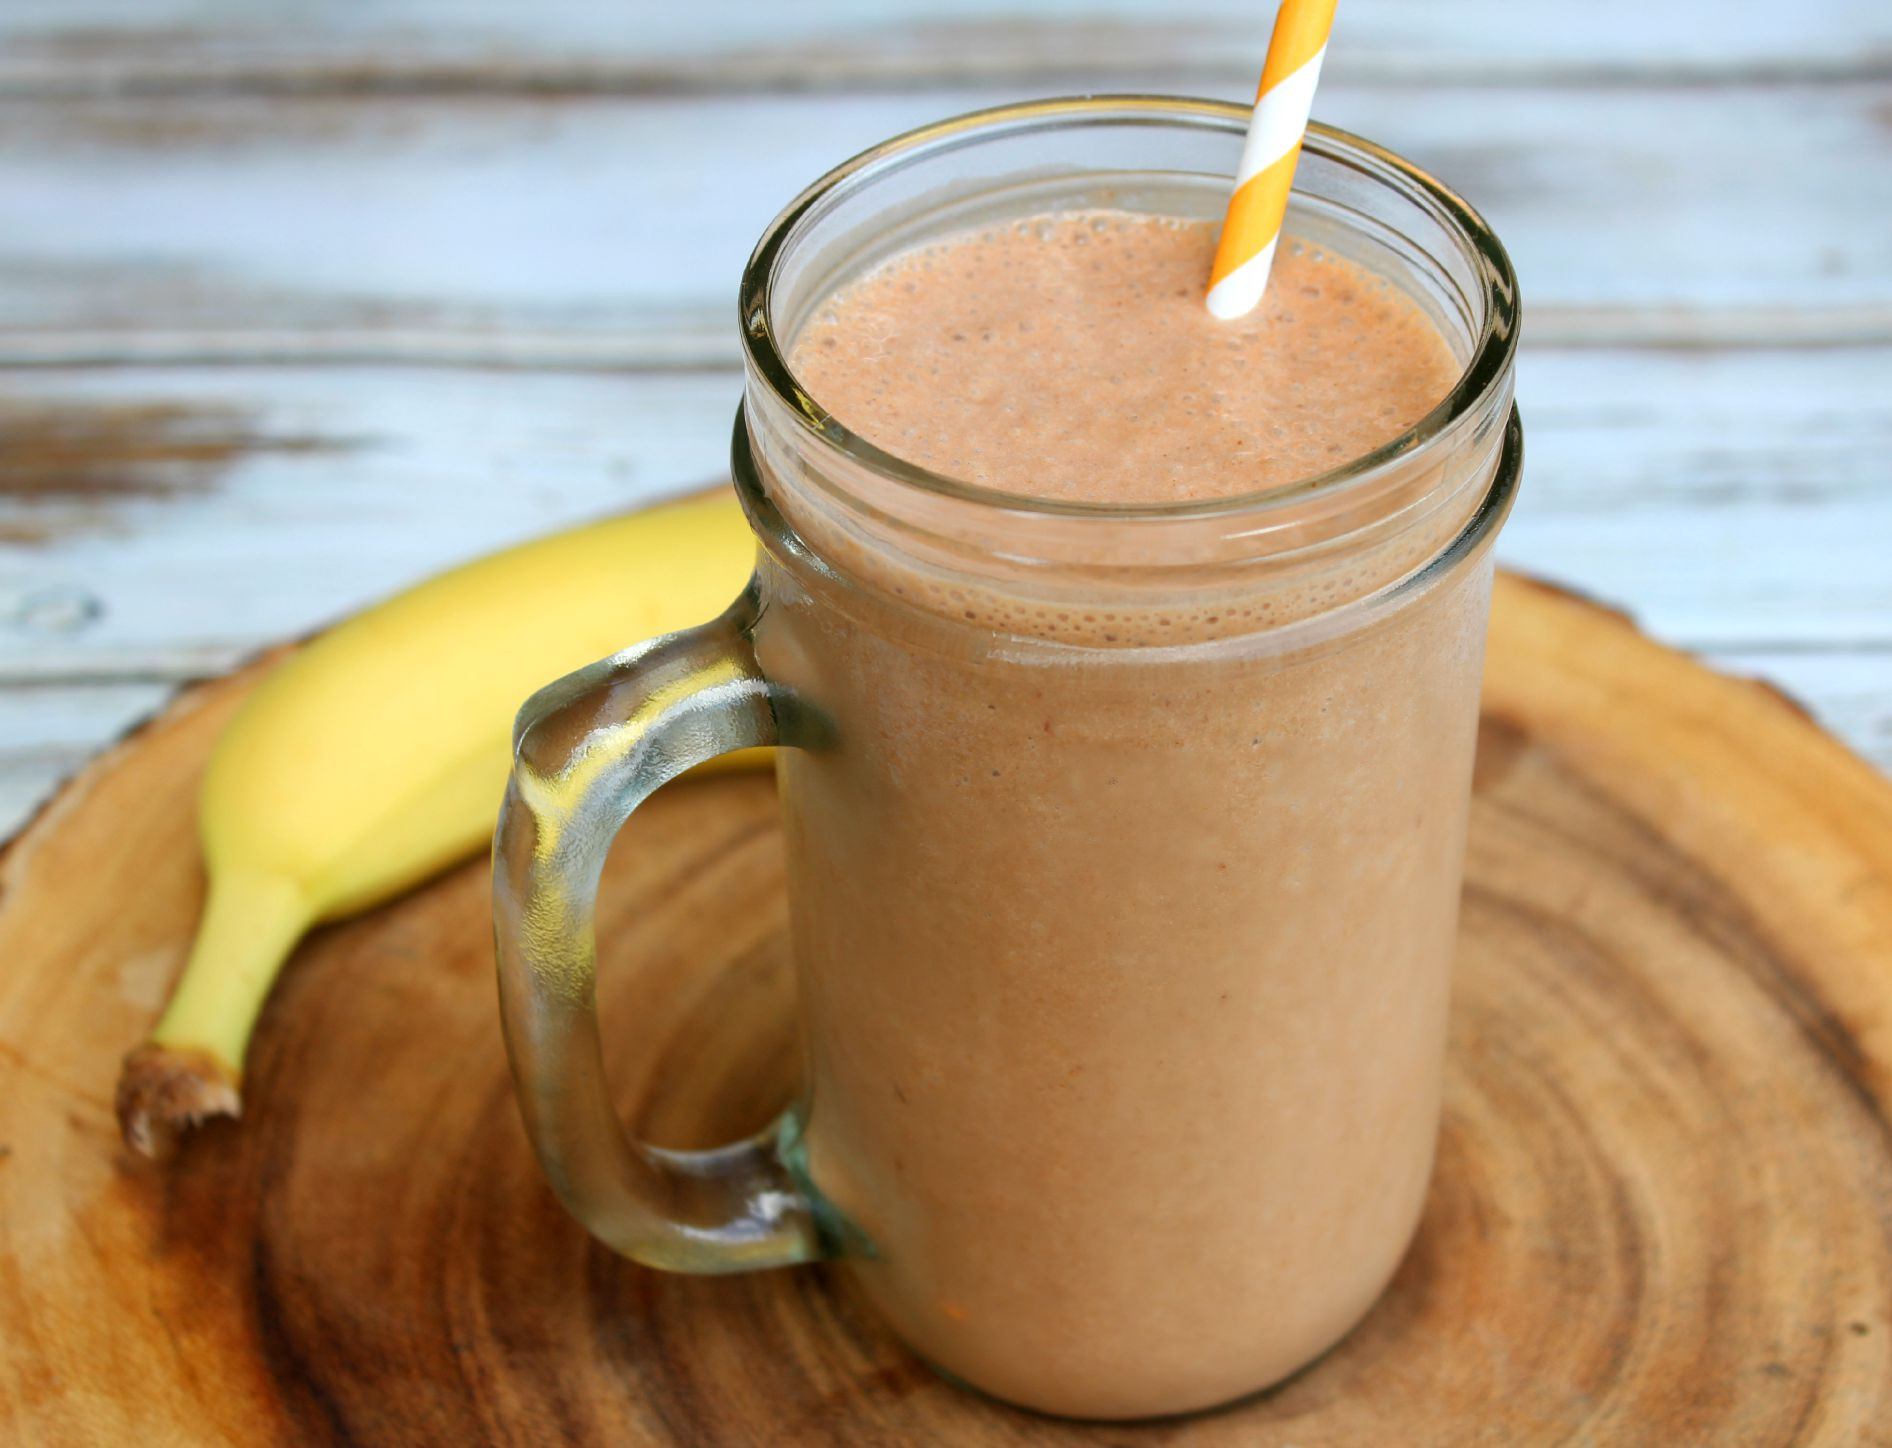 Peanut Butter Smoothie Recipes
 Nutella Banana & Peanut Butter Smoothie addicted to recipes